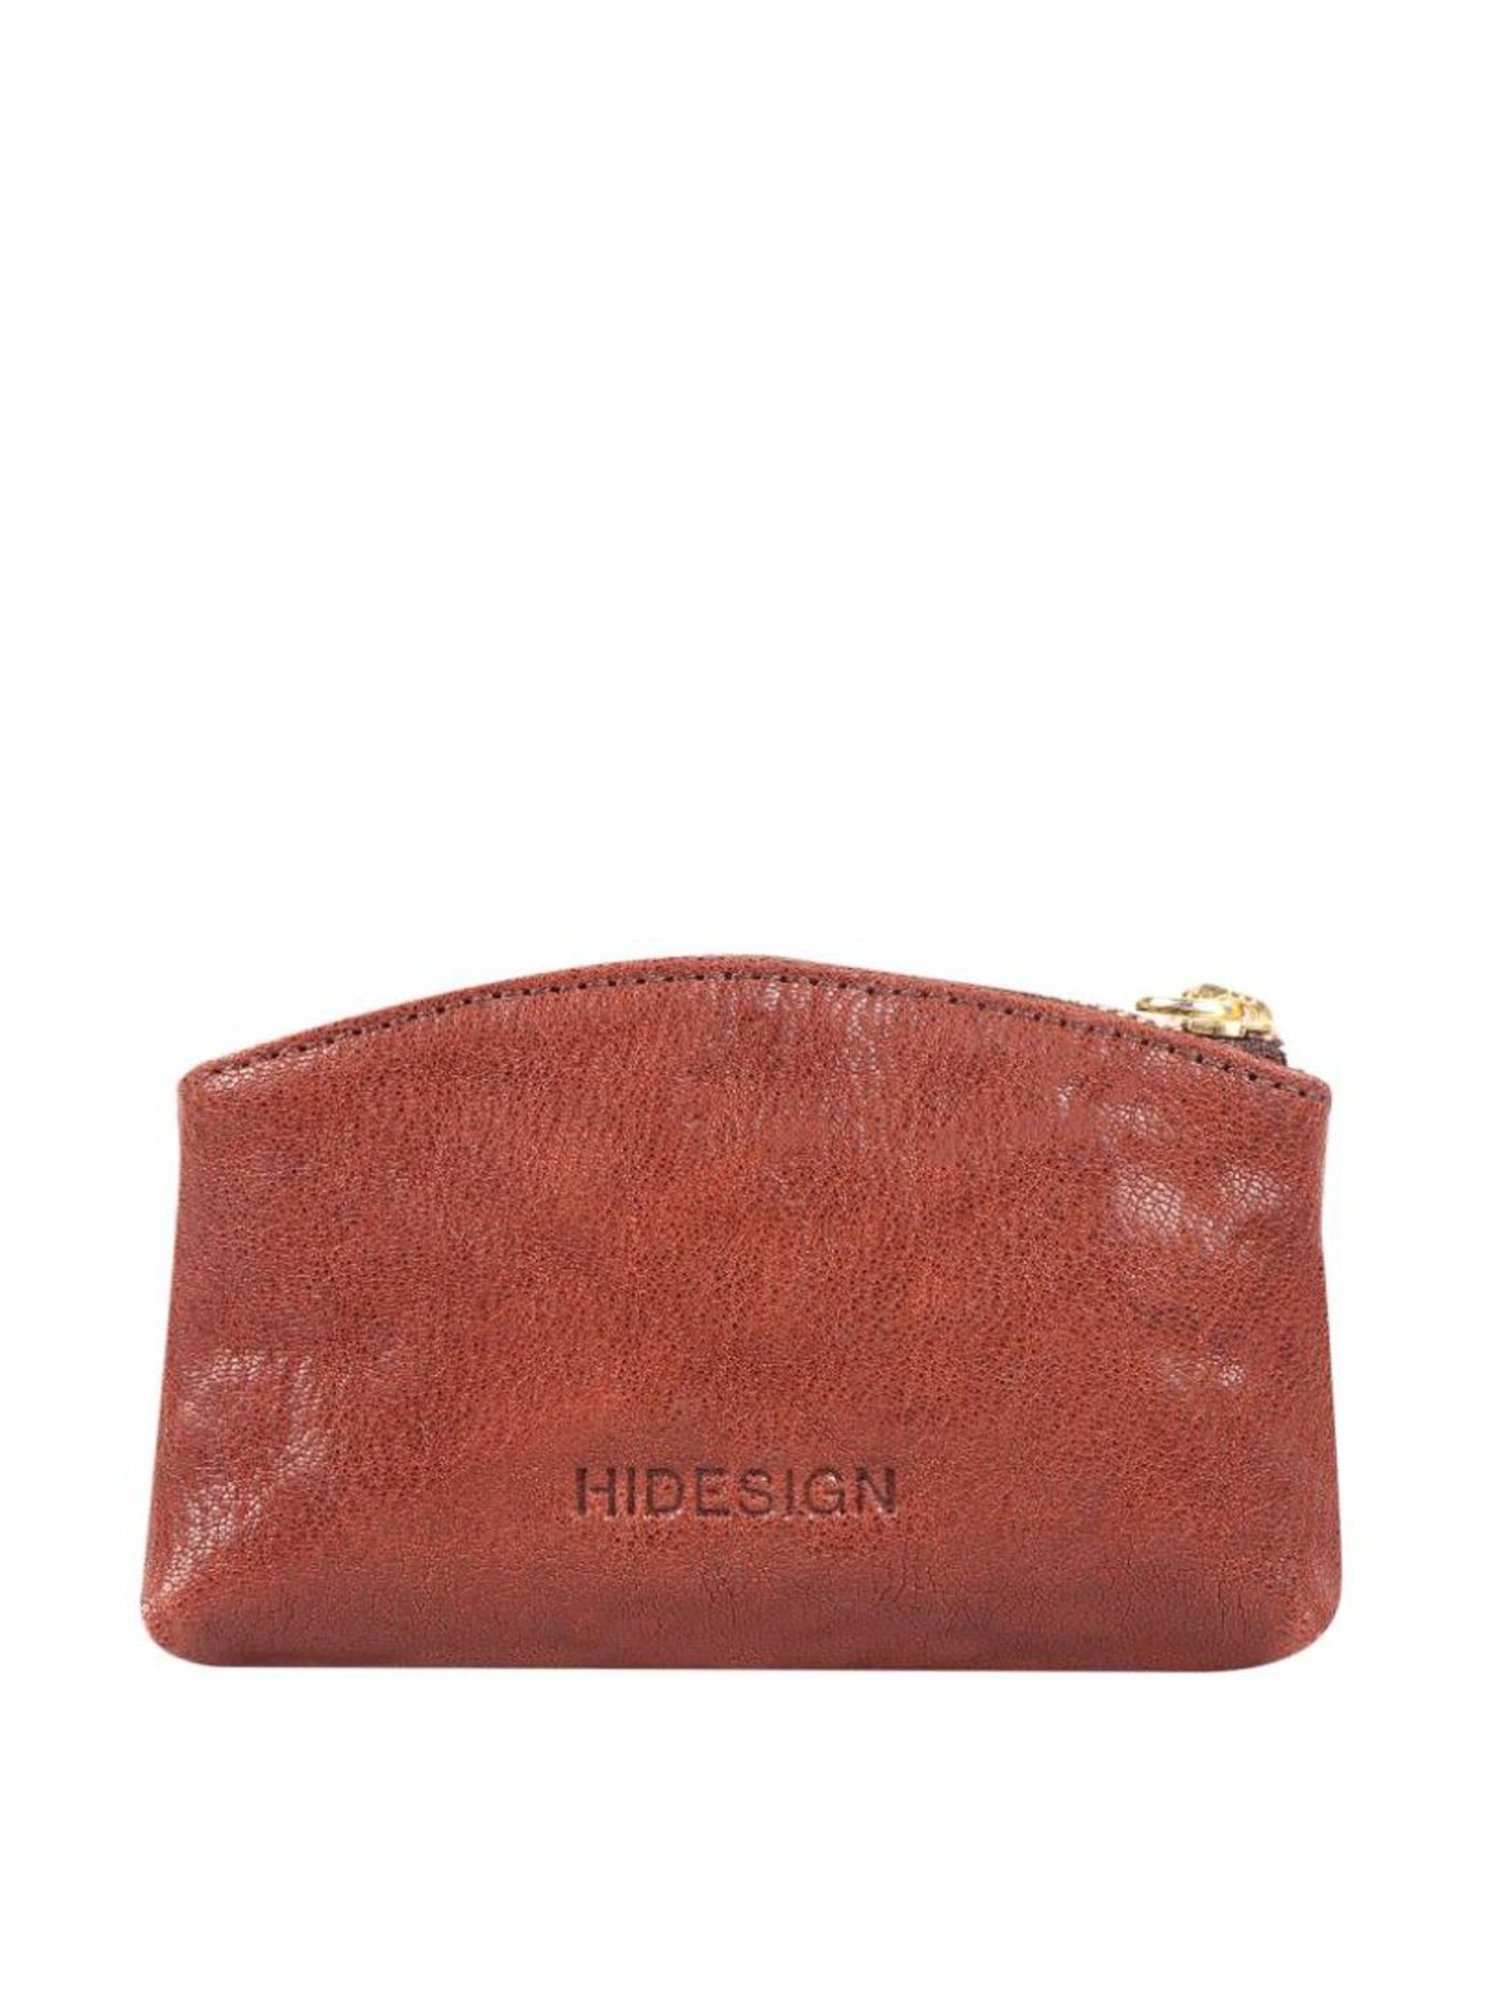 Buy Hidesign Glam W1 RF Red Leather Women's Wallet online